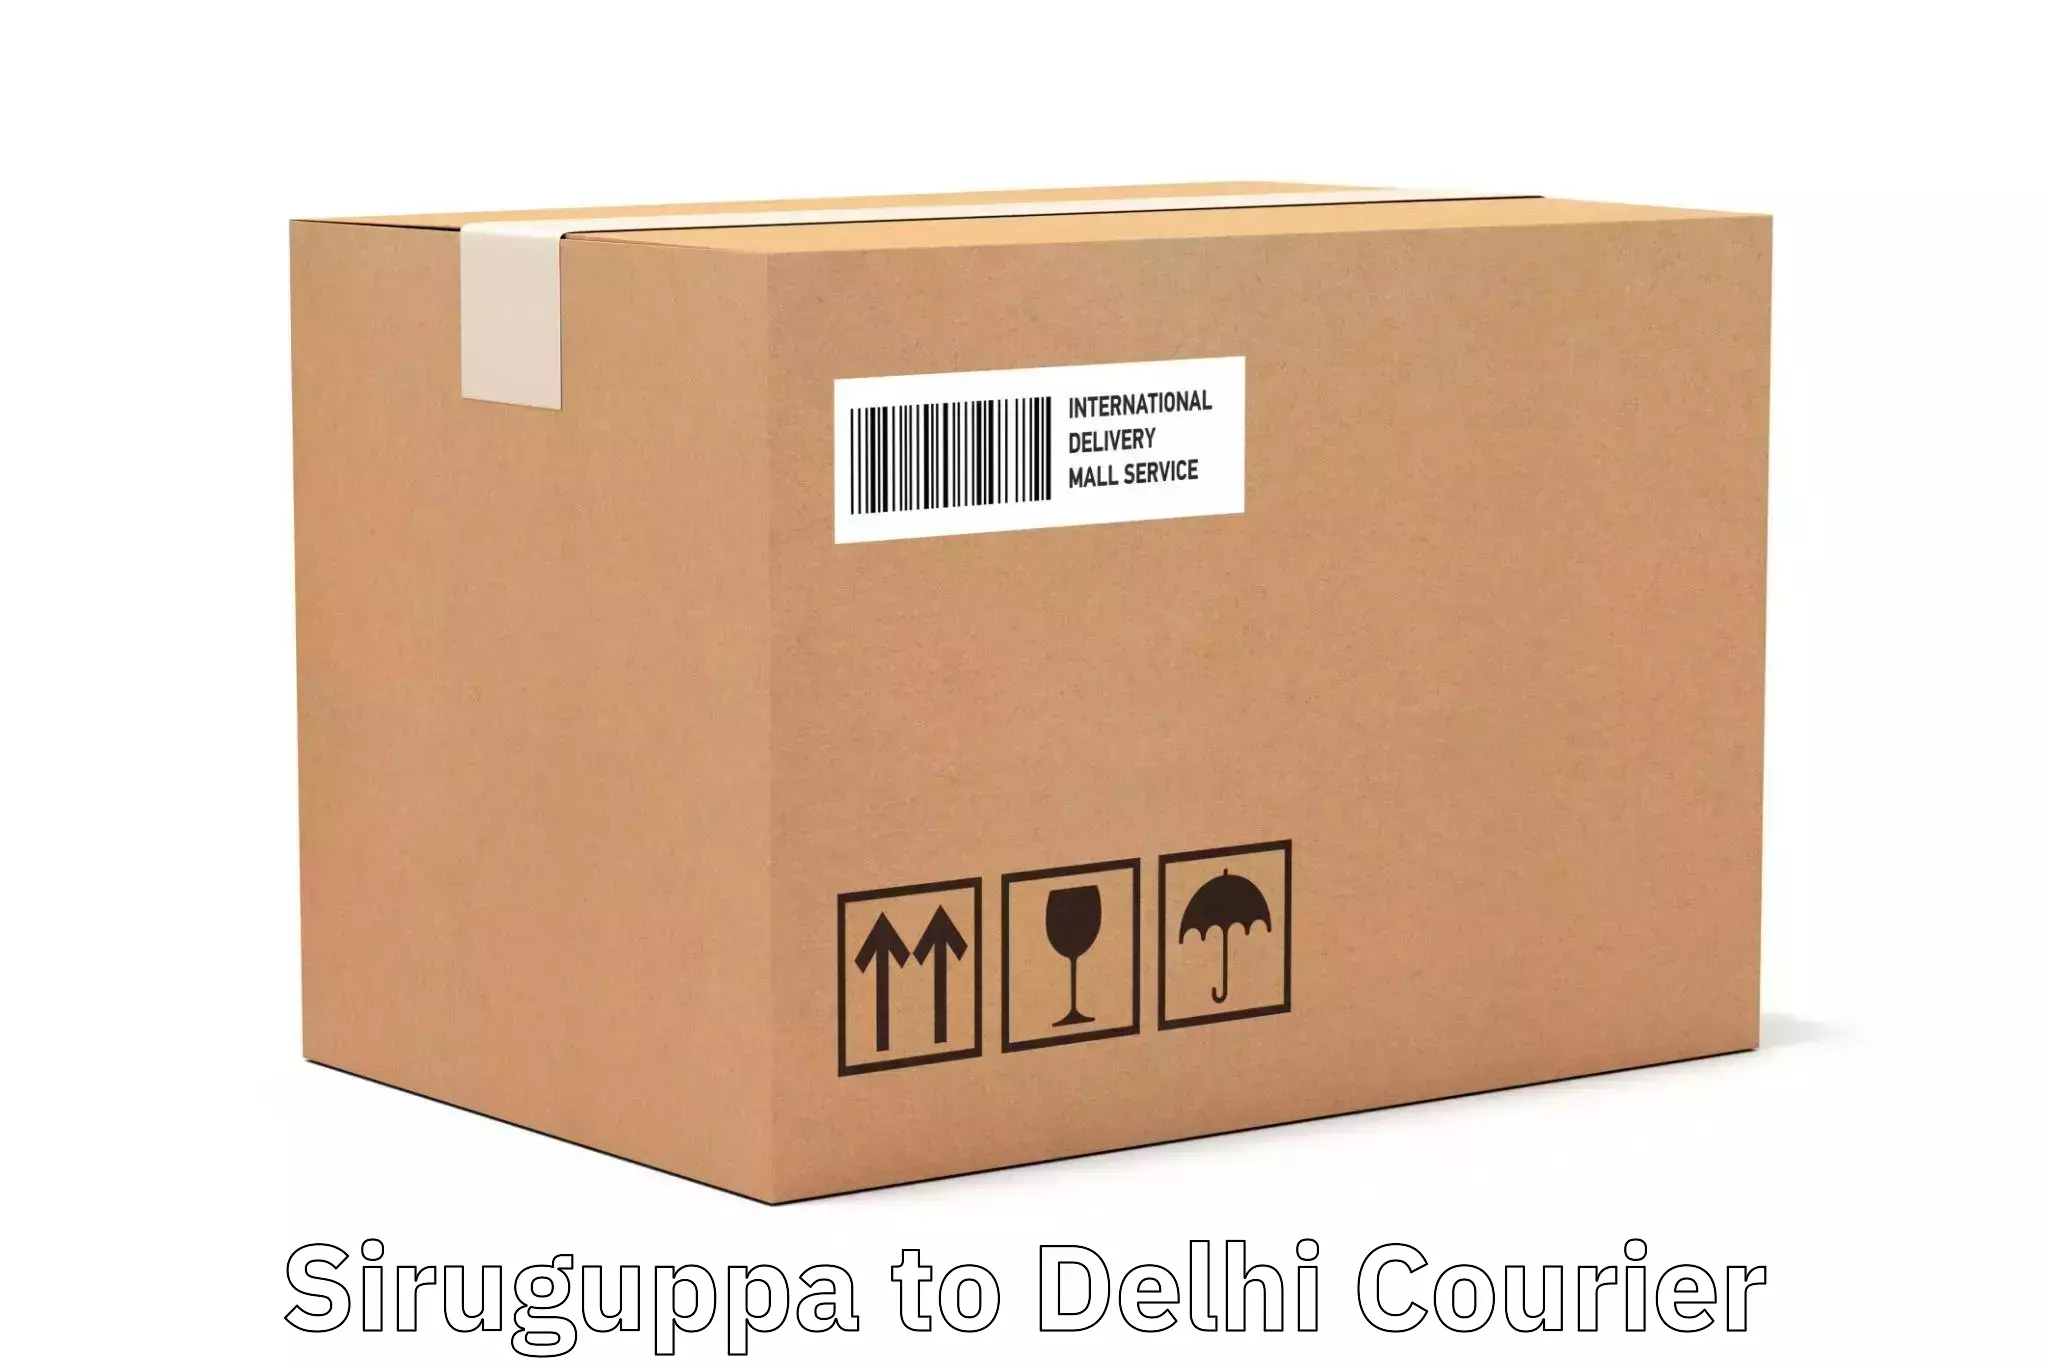 Express courier capabilities Siruguppa to East Delhi